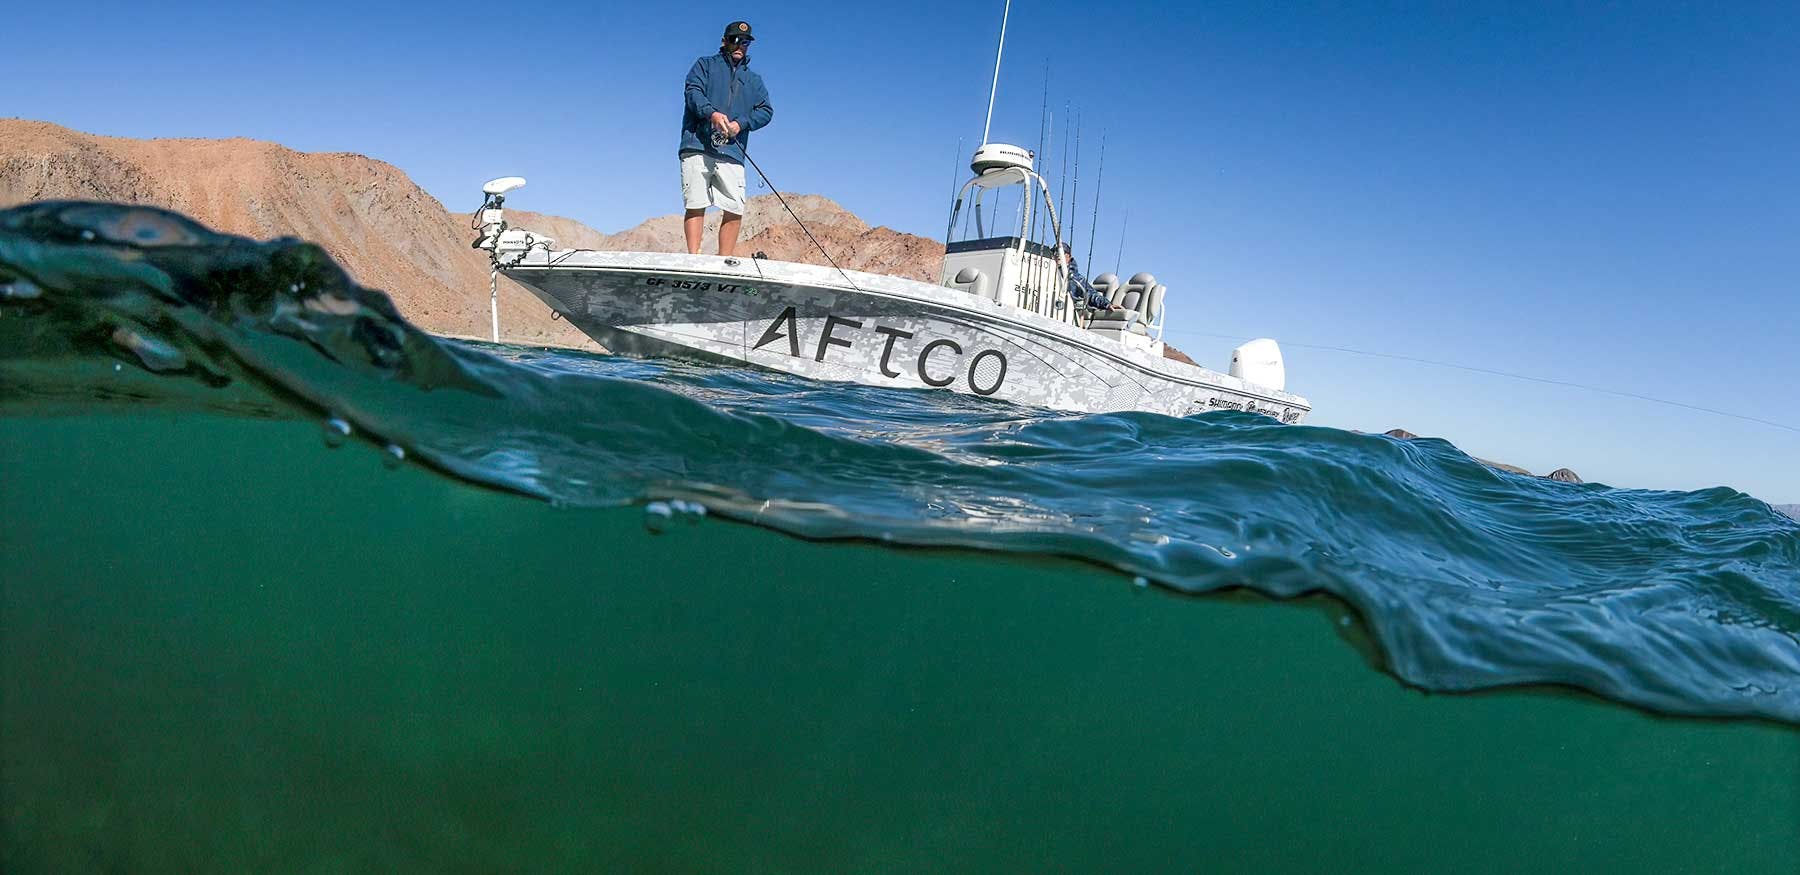 Aftco boat on a sea